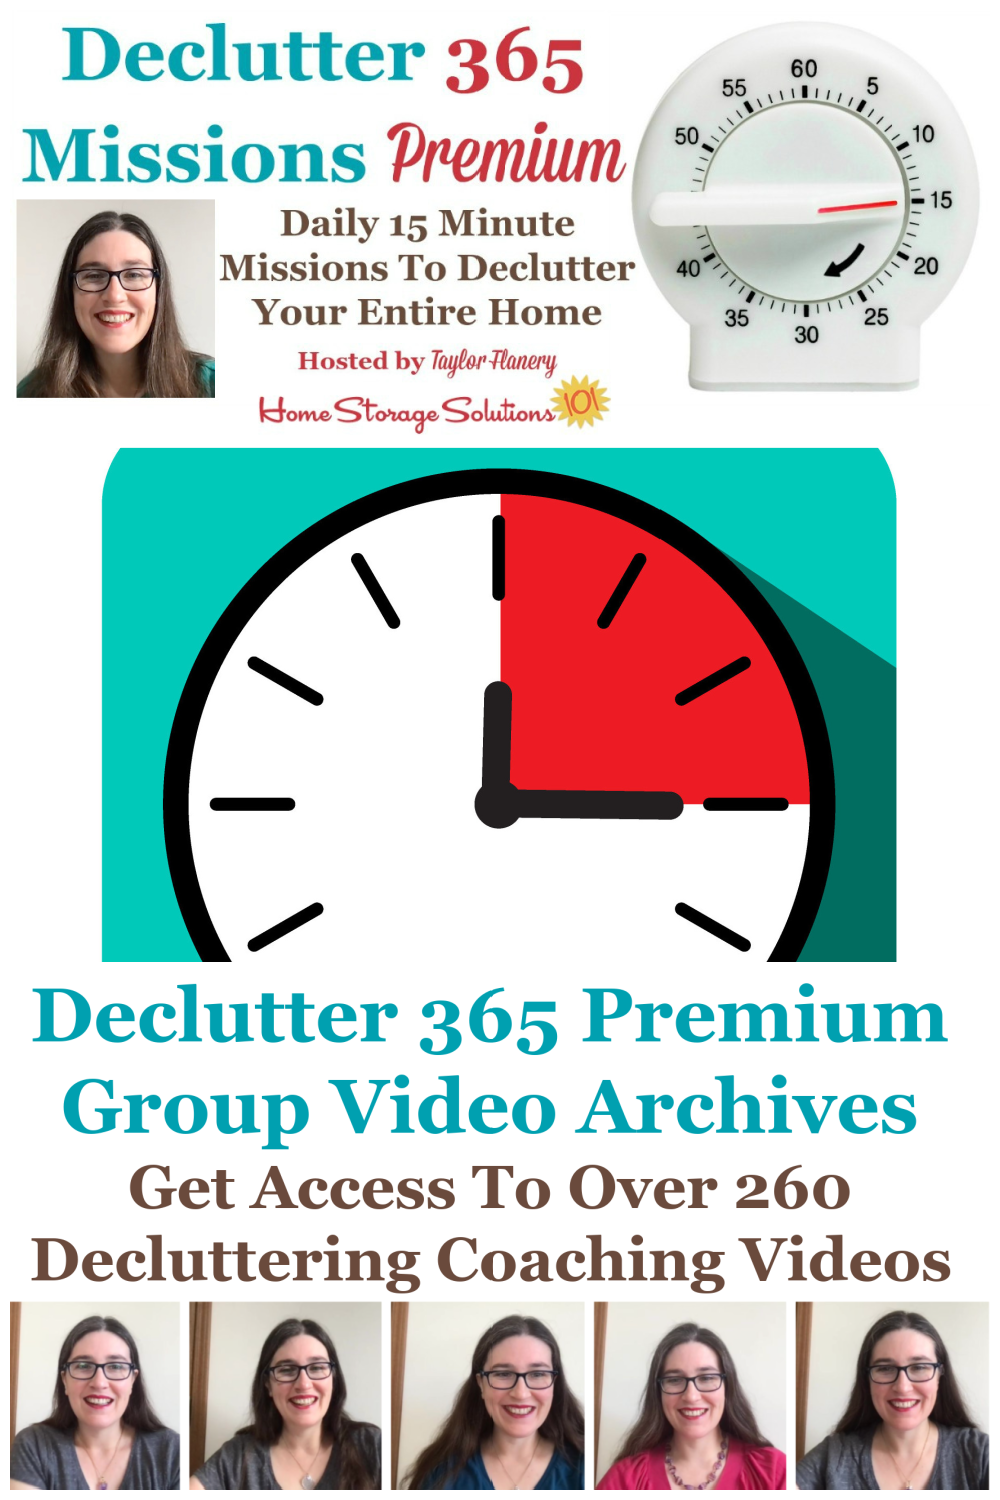 Here's how to get a membership to the Declutter 365 Premium Facebook group for 2023, to get access to the video archives, monthly group decluttering coaching sessions, and encouragement and accountability with Taylor, to declutter, organize and maintain your home {on Home Storage Solutions 101} #Declutter365 #DeclutterHelp #DeclutteringTips